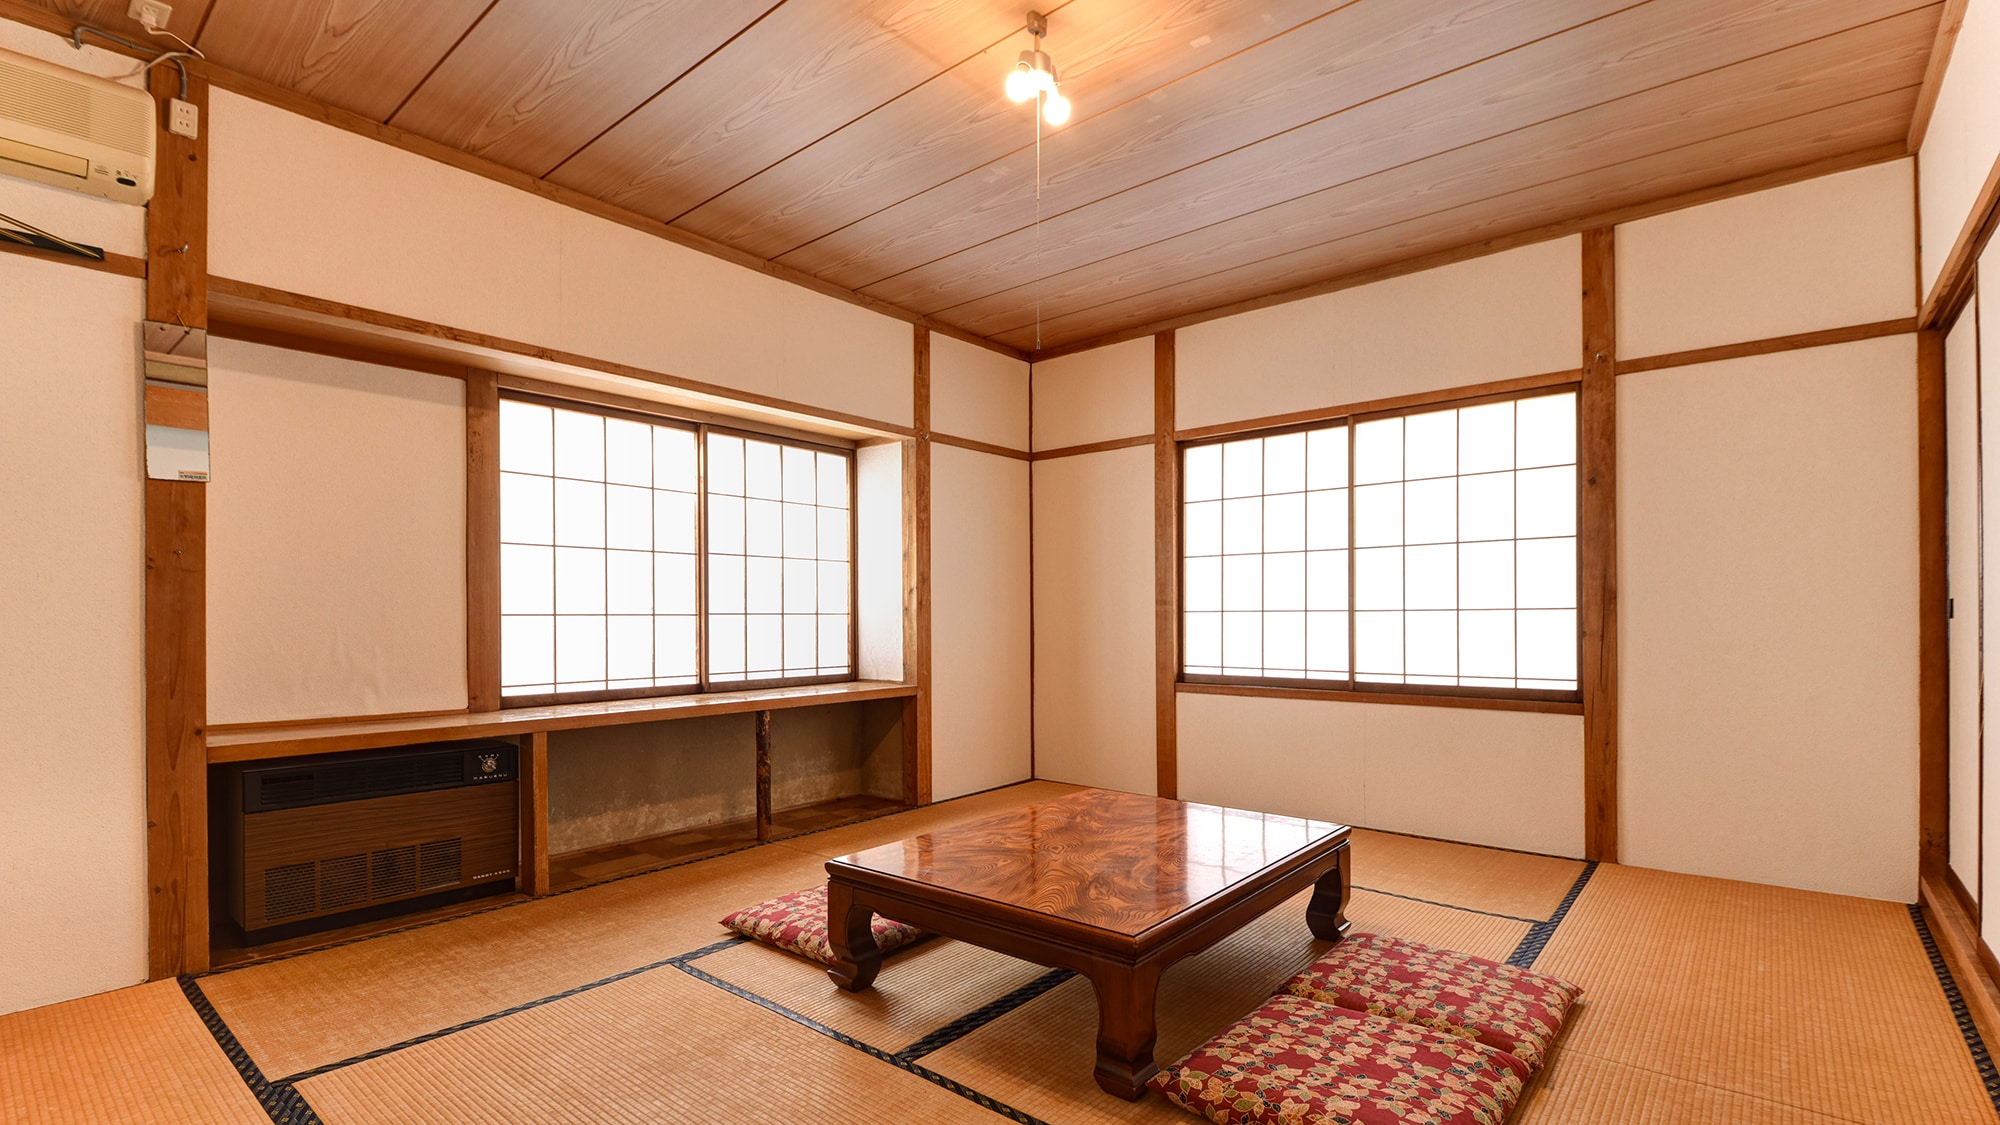 * Japanese-style room in the annex / There are no baths, toilets, or amenities, so you can stay cheaply. Recommended for students and training camps ◎